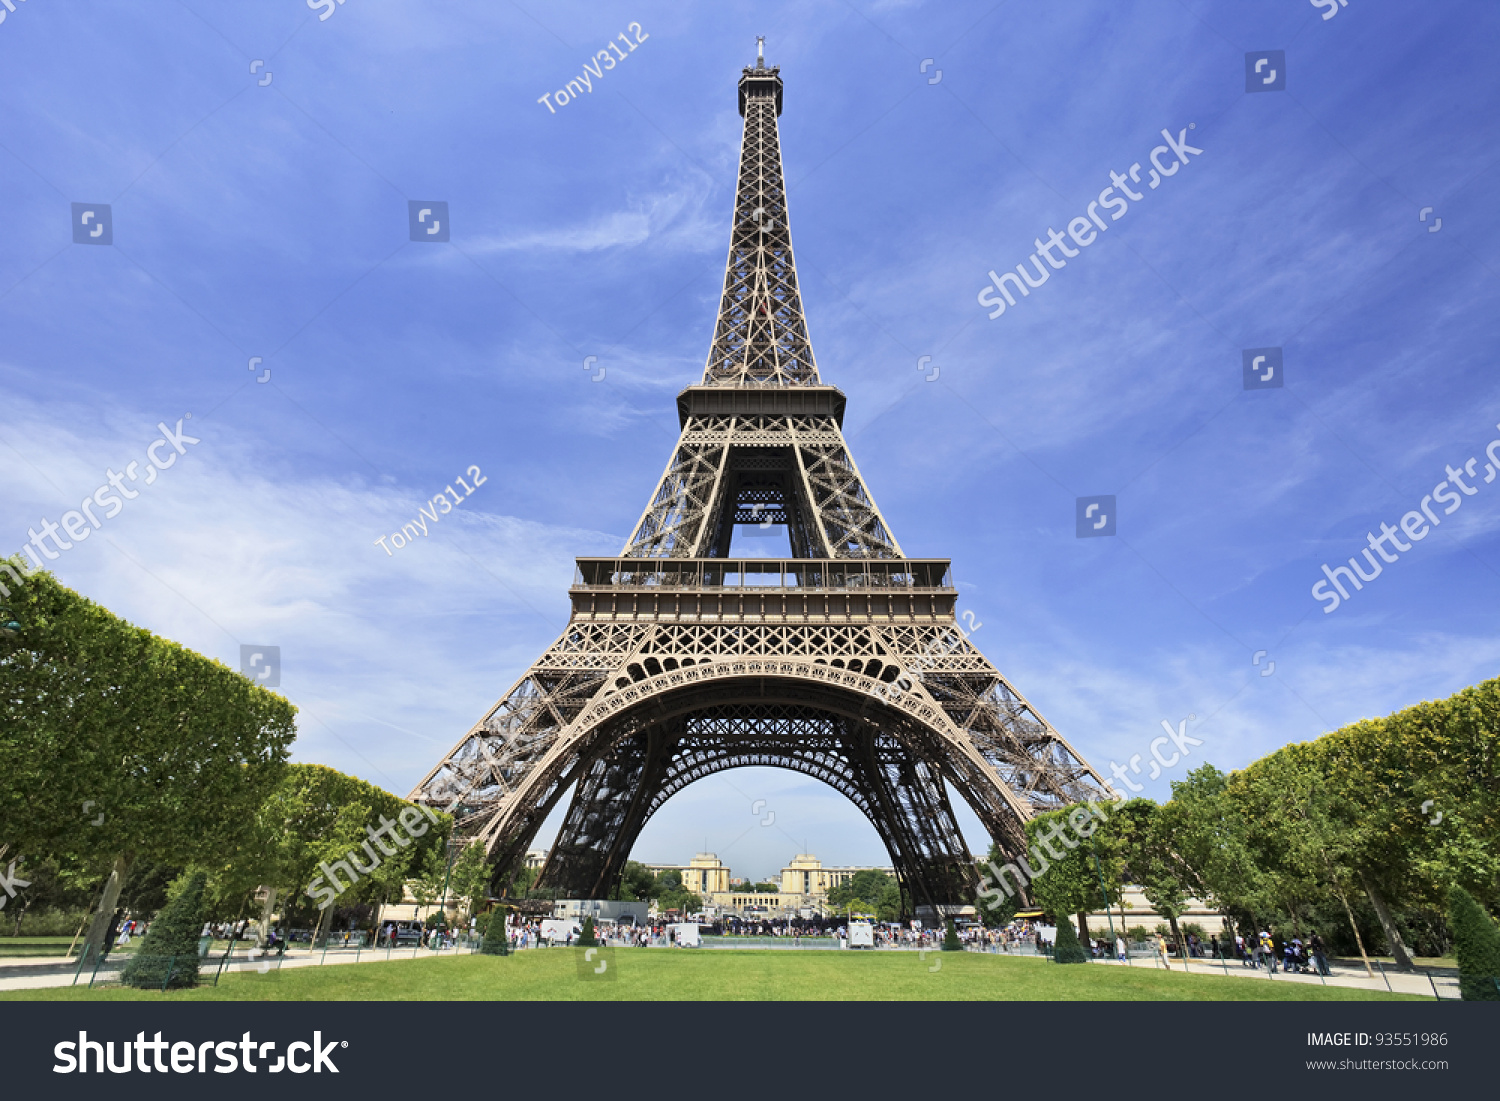 The famous Eiffel Tower in Paris against a dramatic blue sky #93551986